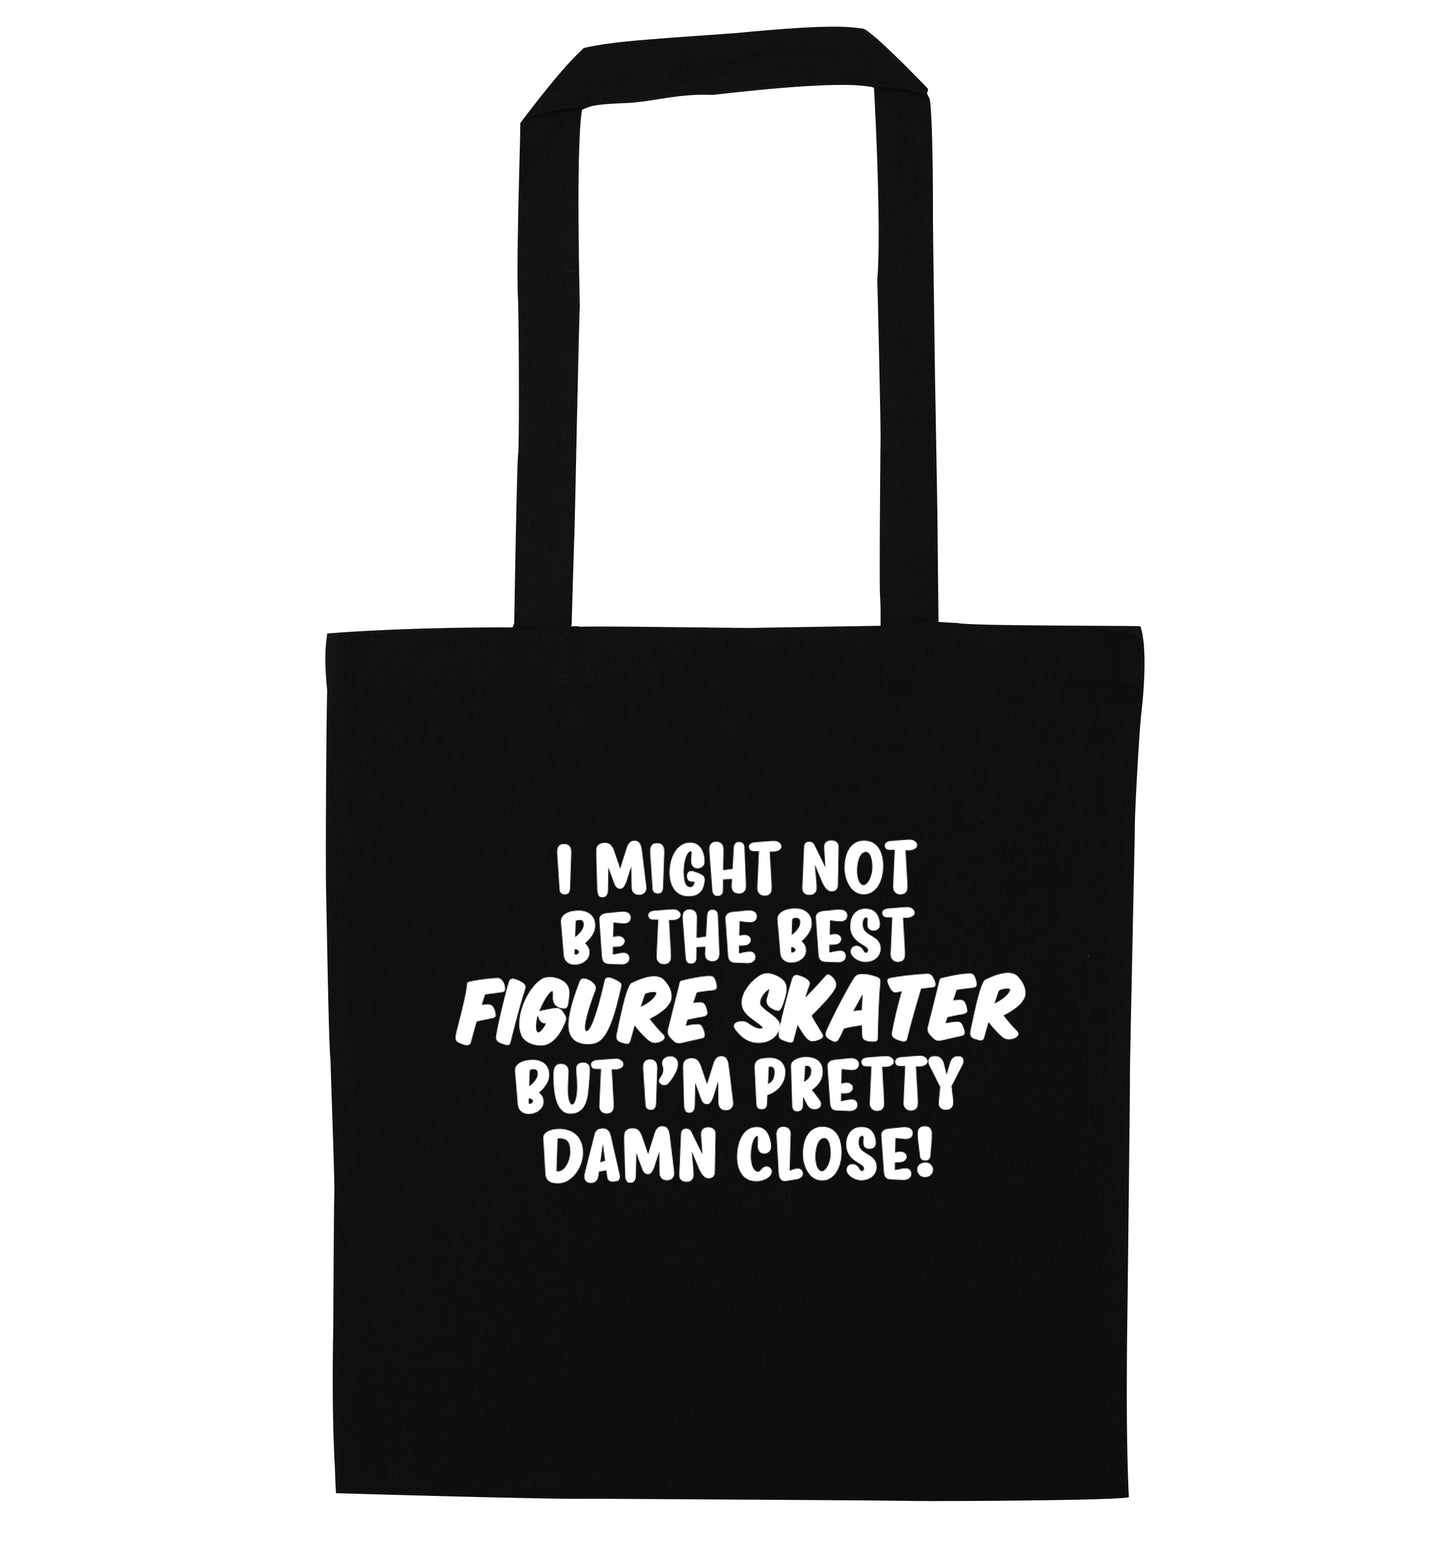 I might not be the best figure skater but I'm pretty damn close! black tote bag